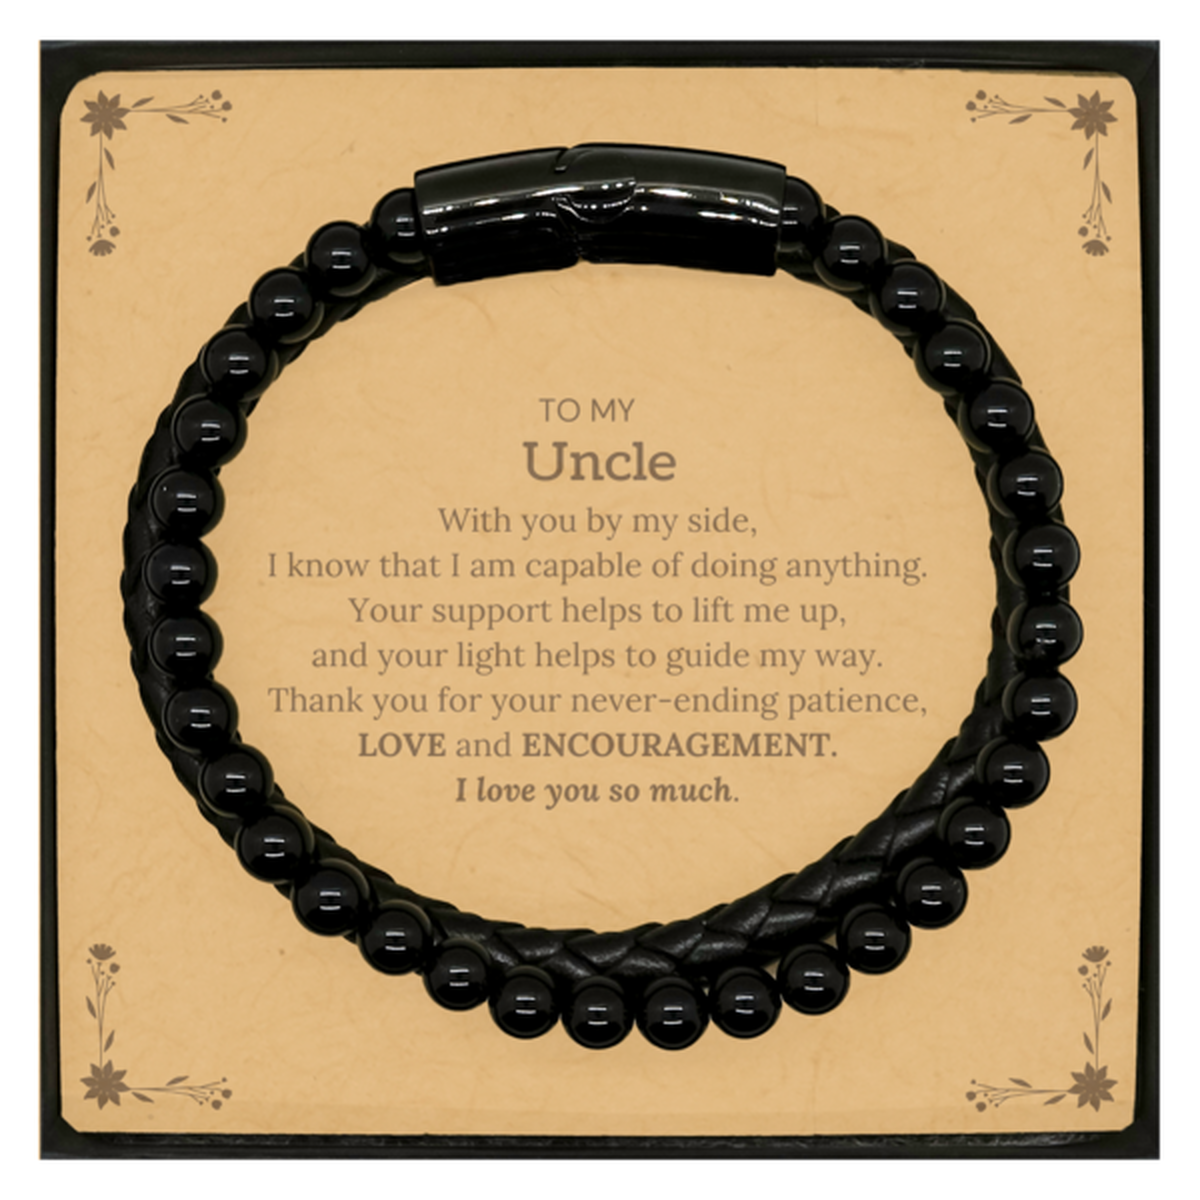 Appreciation Uncle Stone Leather Bracelets Gifts, To My Uncle Birthday Christmas Wedding Keepsake Gifts for Uncle With you by my side, I know that I am capable of doing anything. I love you so much